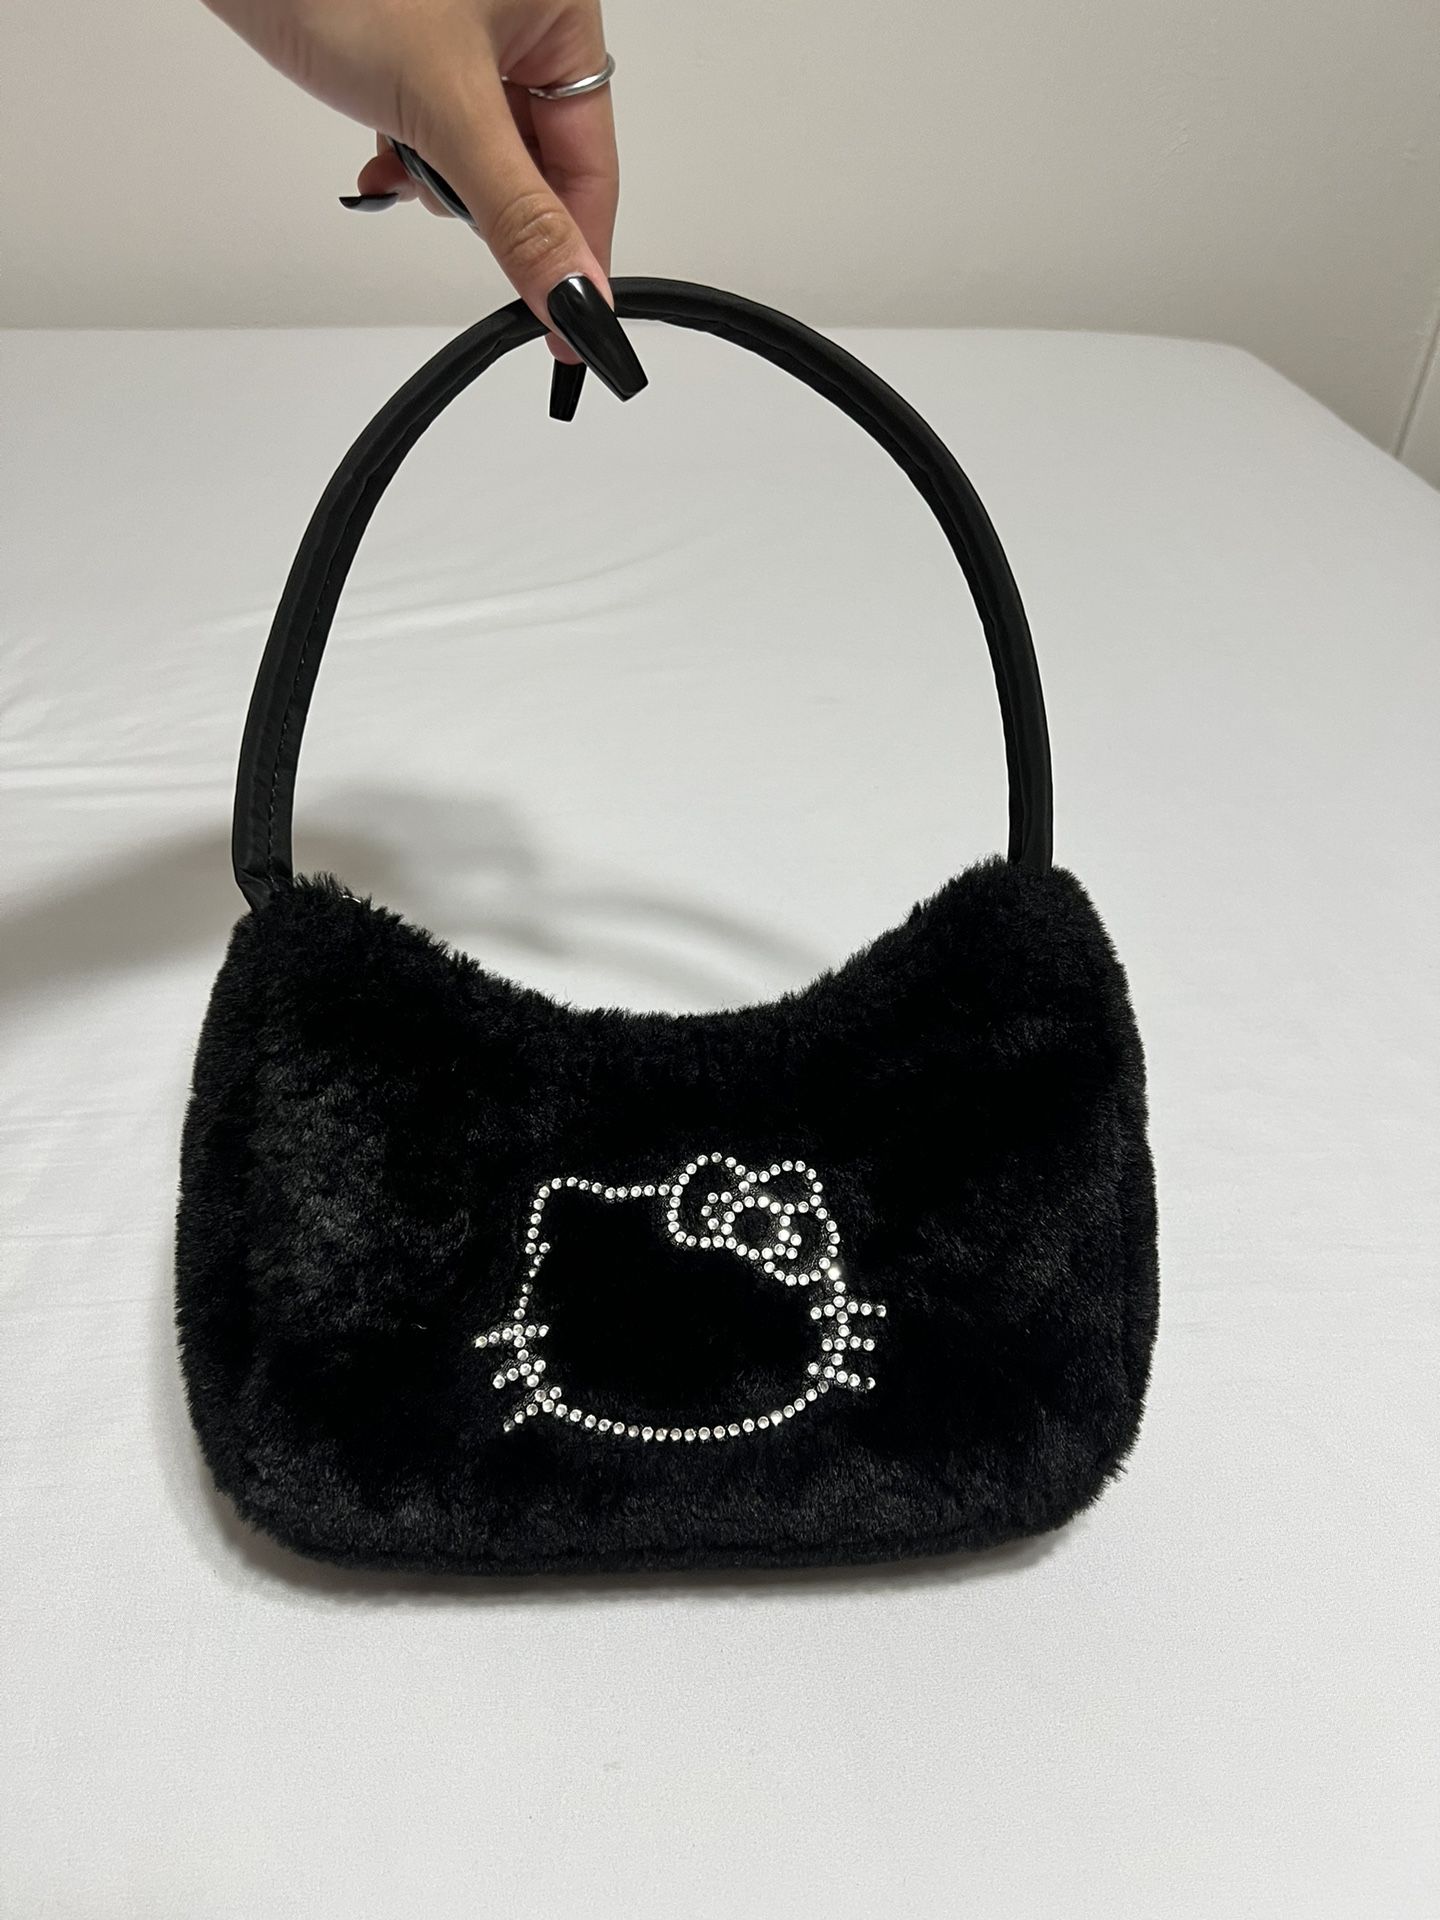 Hello kitty Messenger Bag for Sale in Arlington, TX - OfferUp